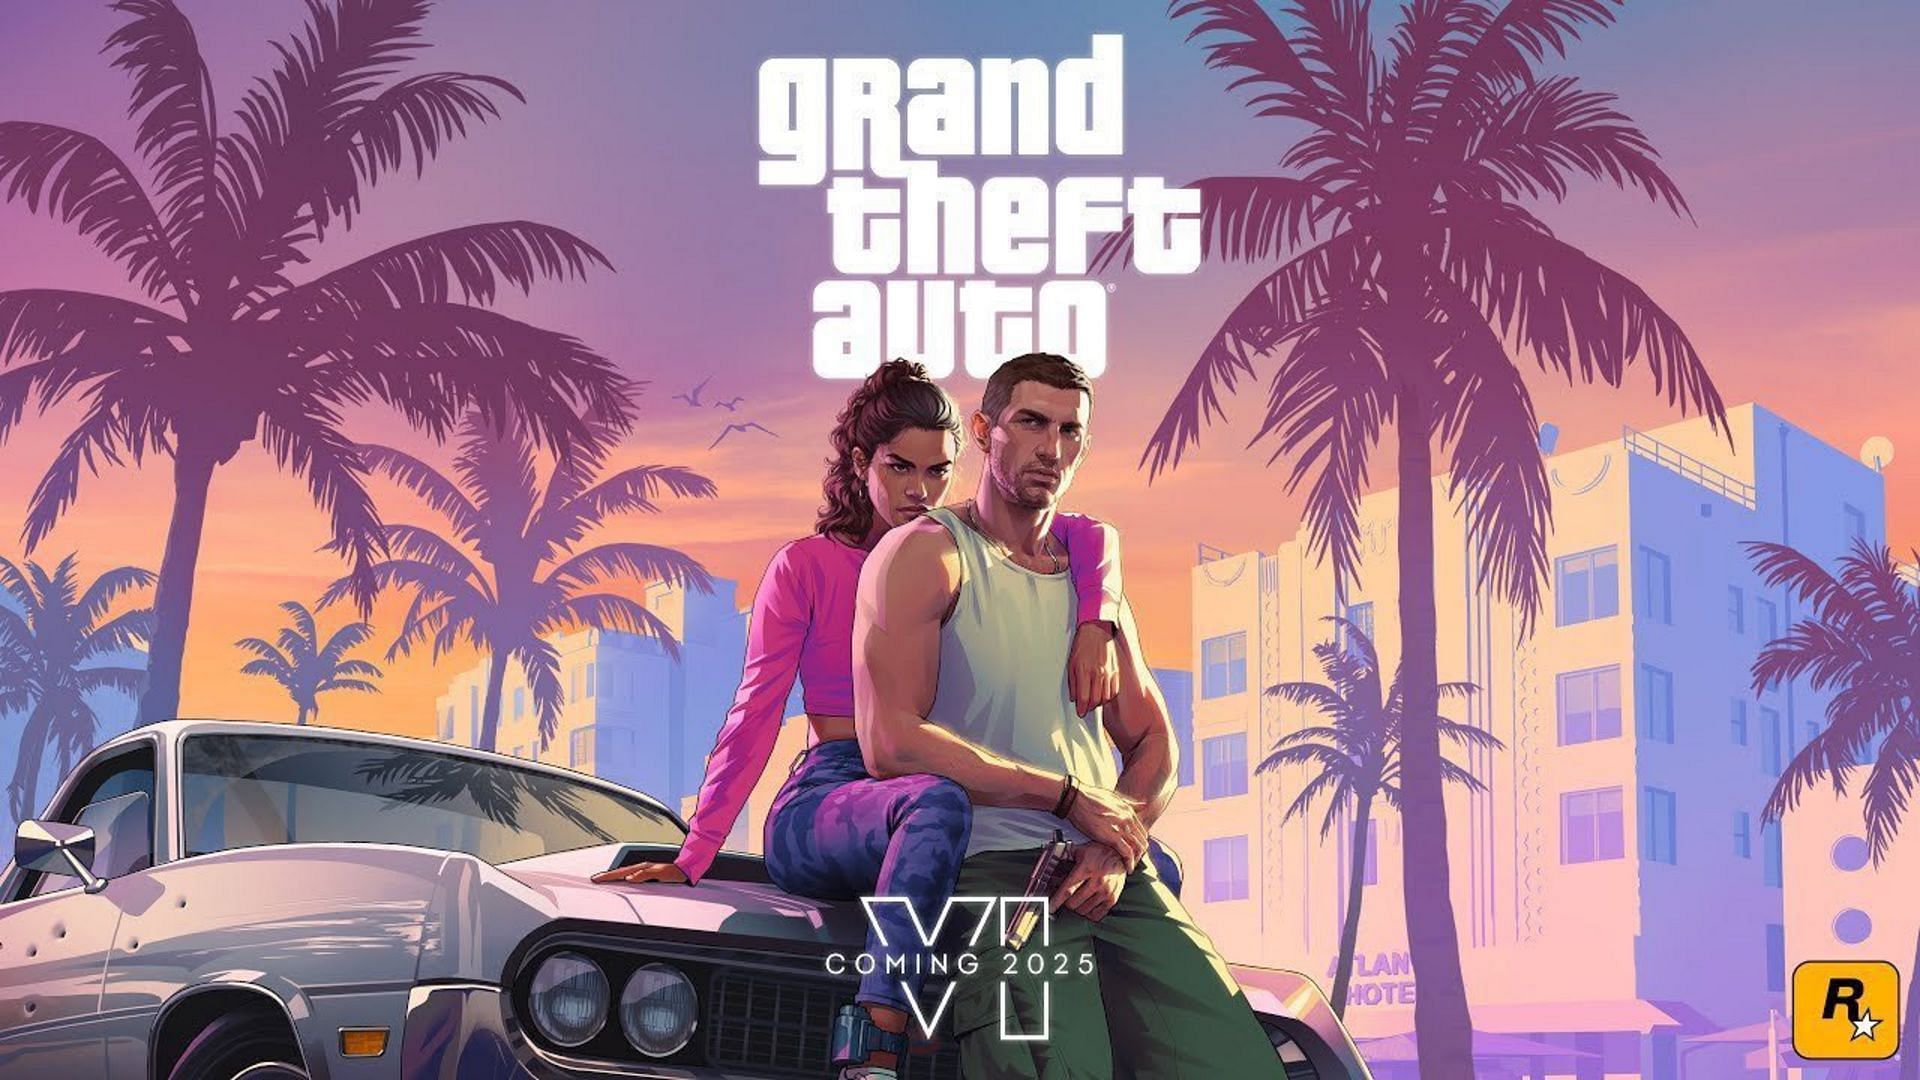 5 huge changes expected to debut in GTA 6